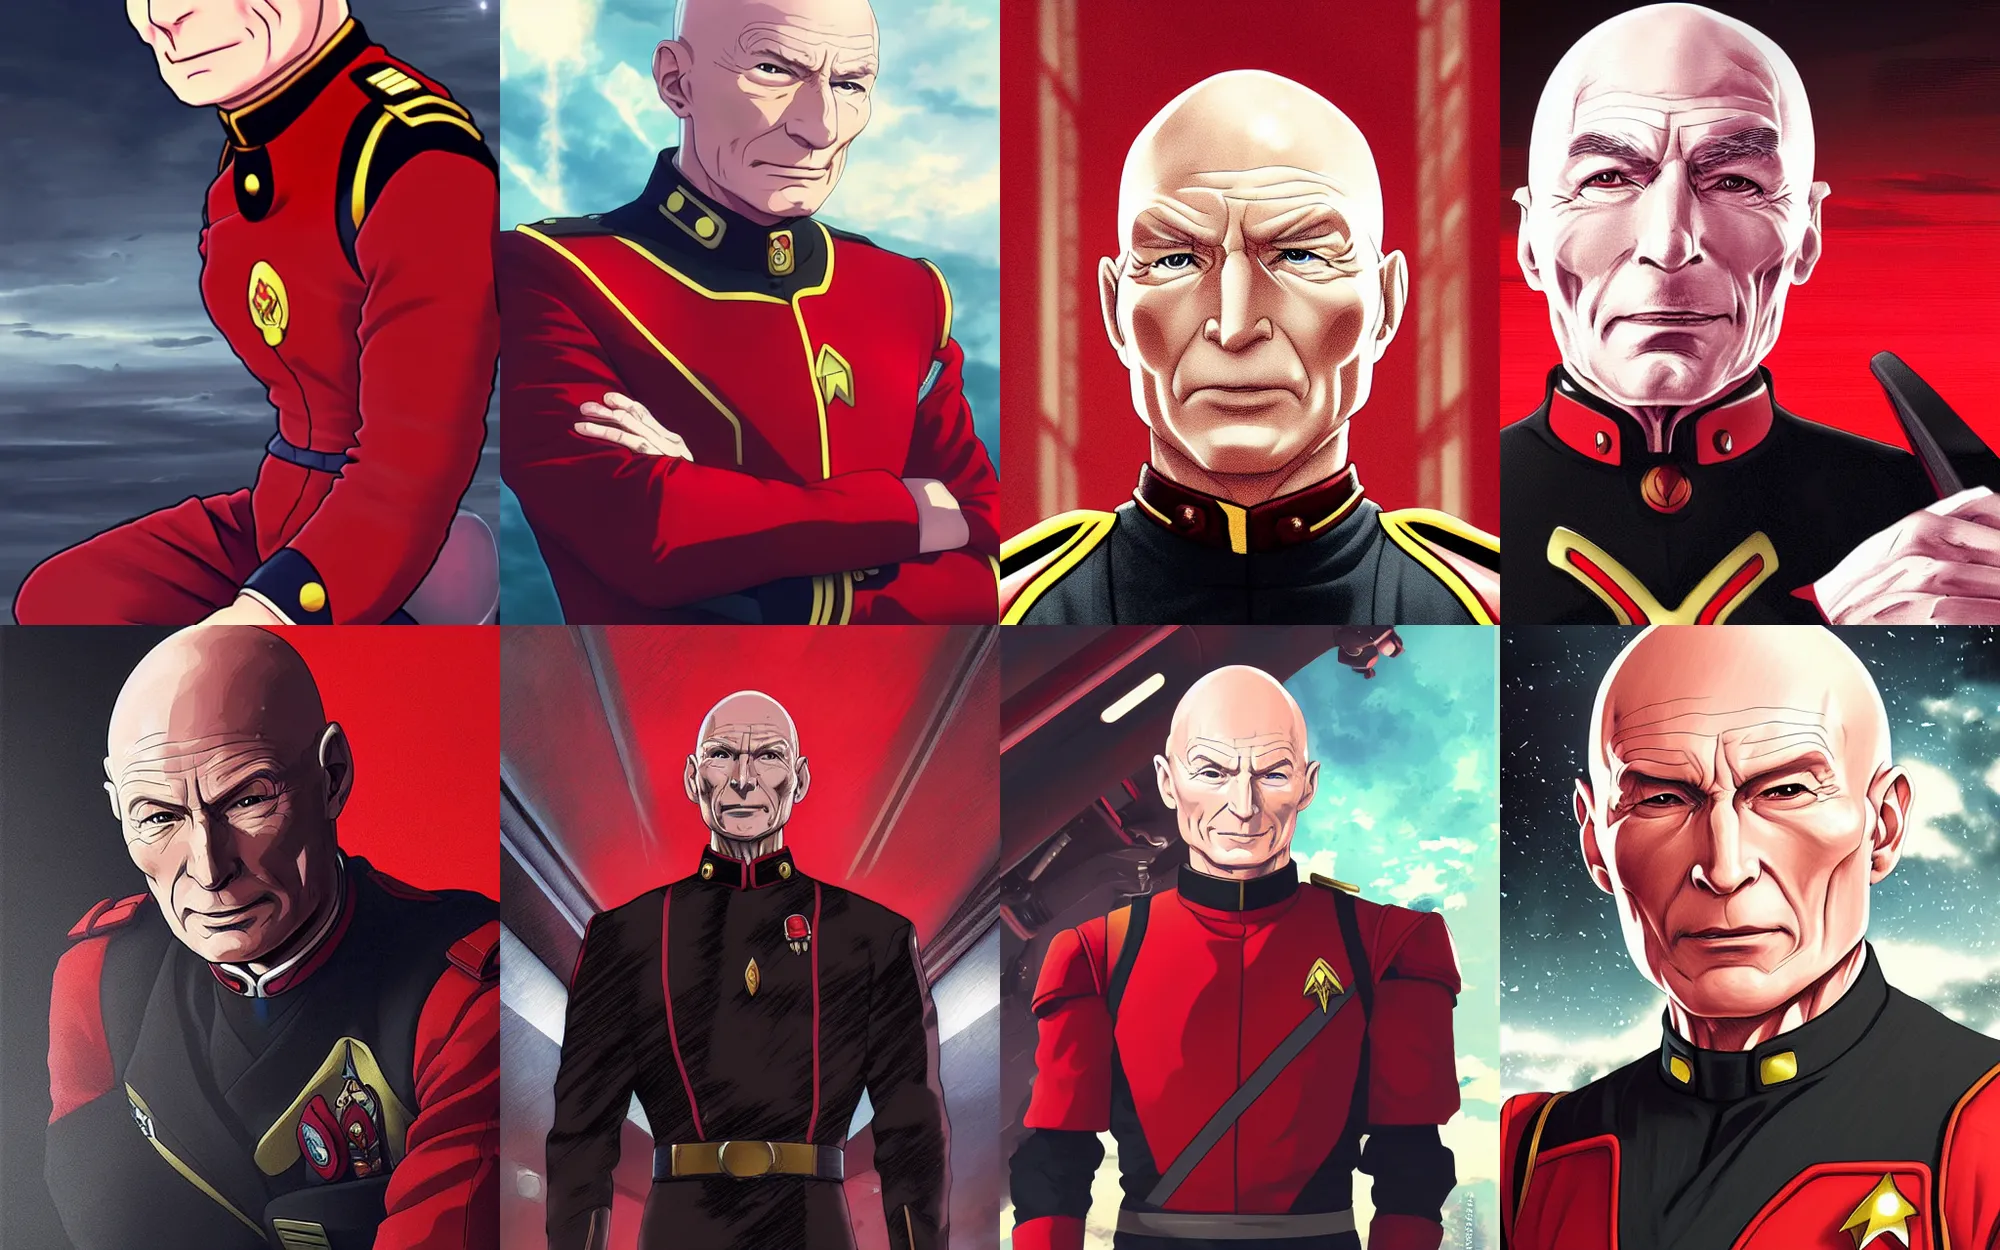 Prompt: Digital anime art by WLOP and Mobius, Closeup of Captain Picard wearing a red and black uniform from The Next Generation, silver insignia, serious expression, [[empty warehouse]] background, highly detailed, spotlight